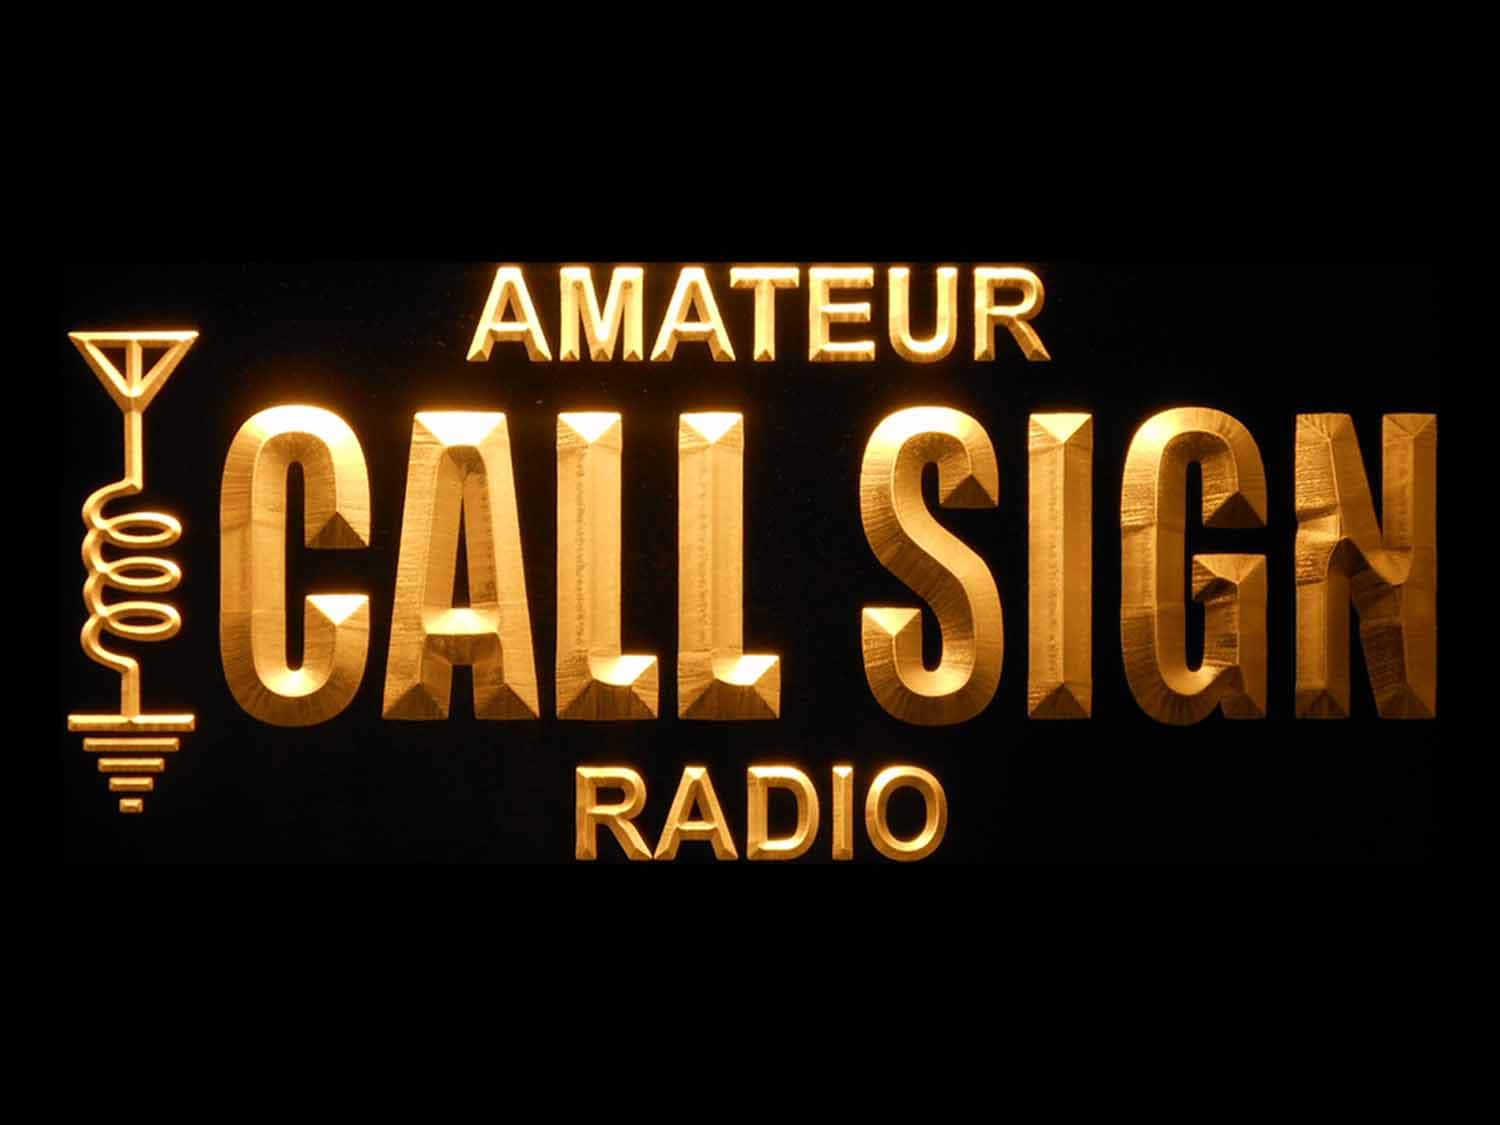 Custom Amateur Radio Your Call Sign Led Neon Sign St3 Wb Tm Etsy